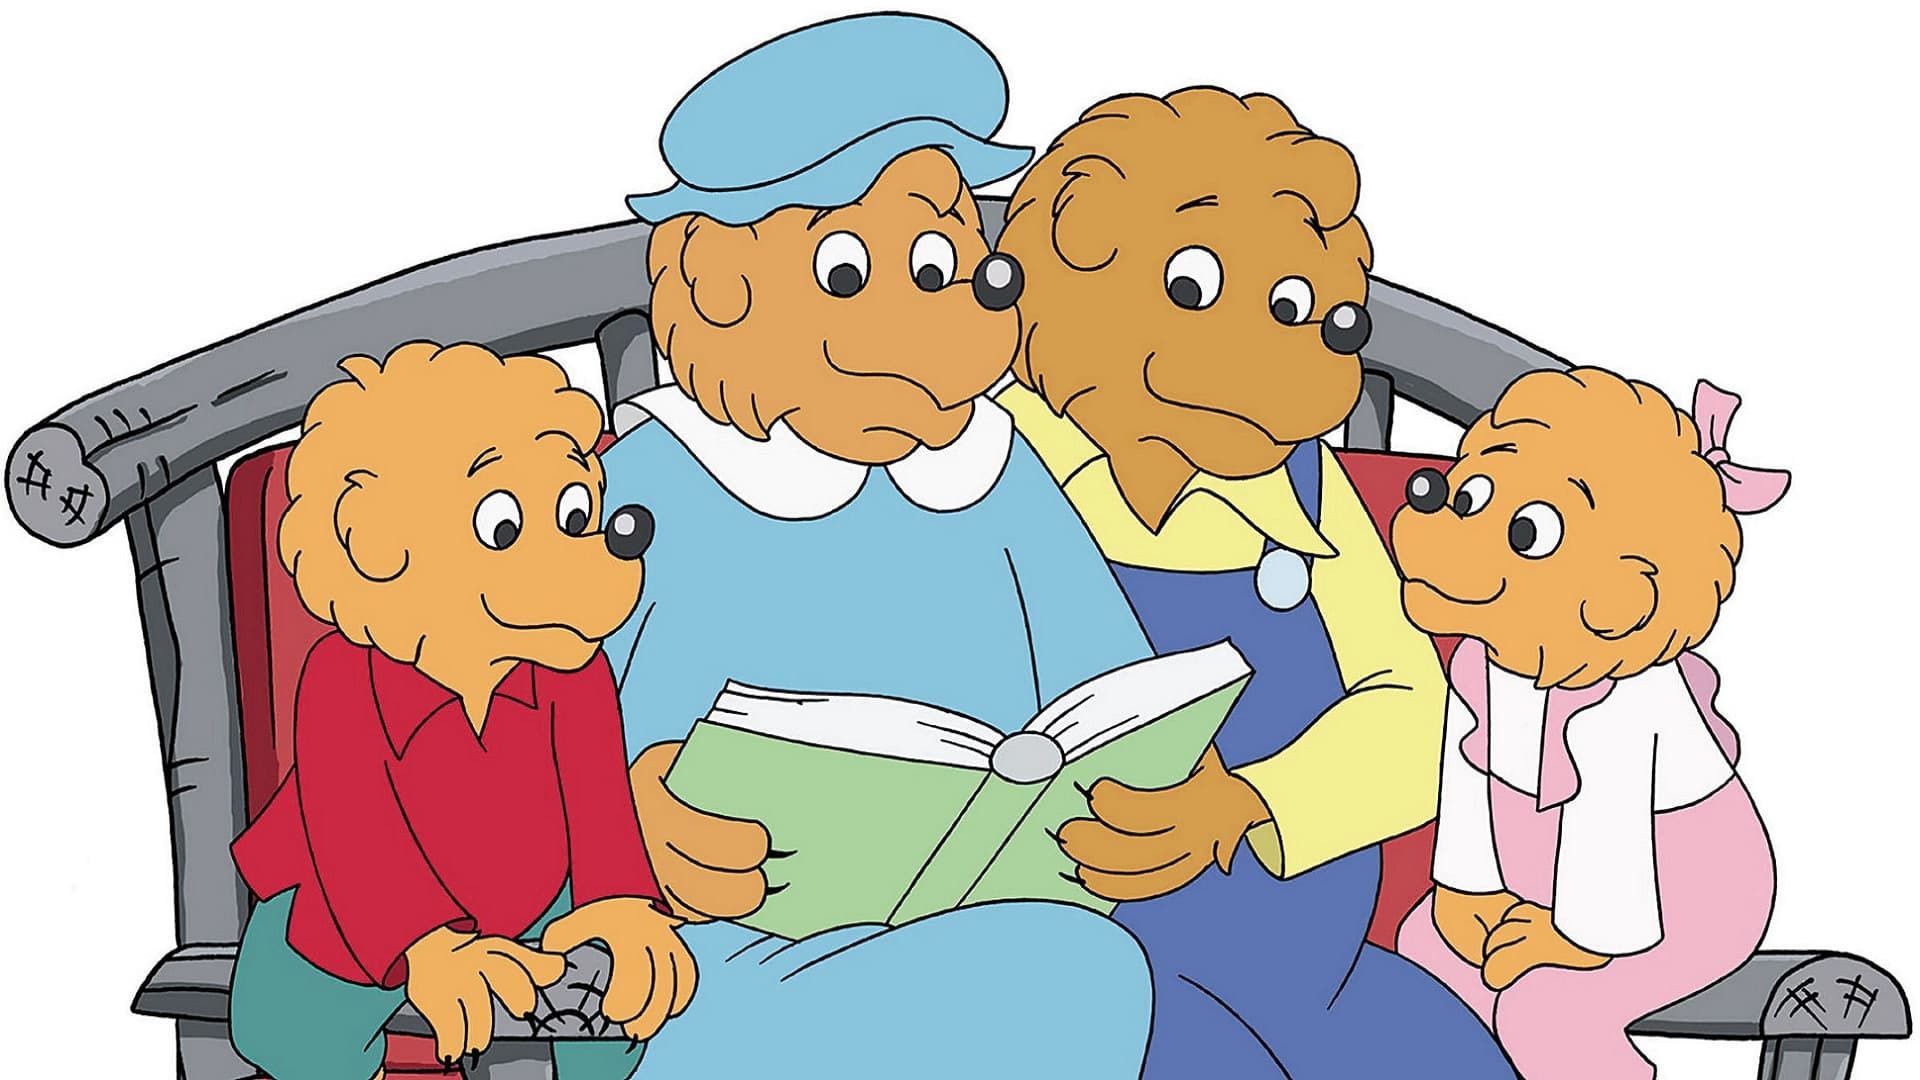 The Berenstain Bears background